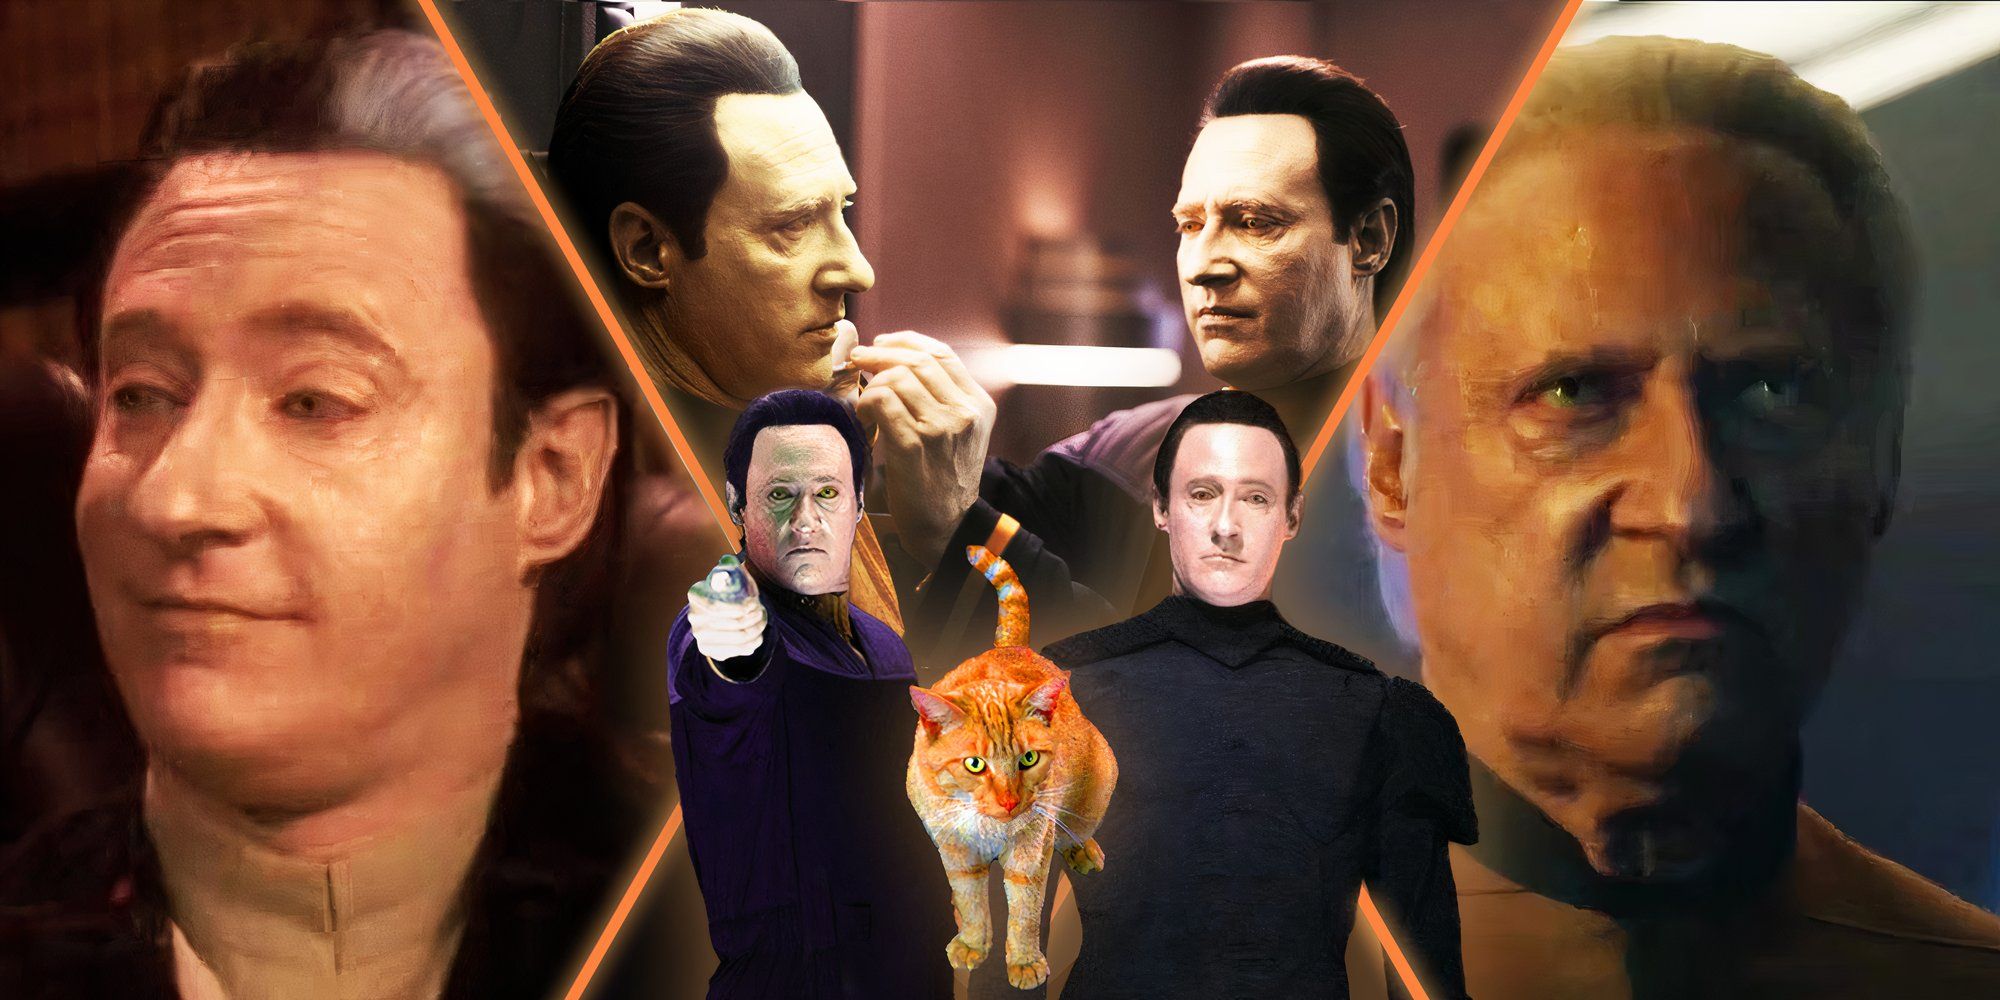 Star Trek: What happened to Data? Featuring Brent Spiner as Data, Lore, and B4 (with Spot the cat)